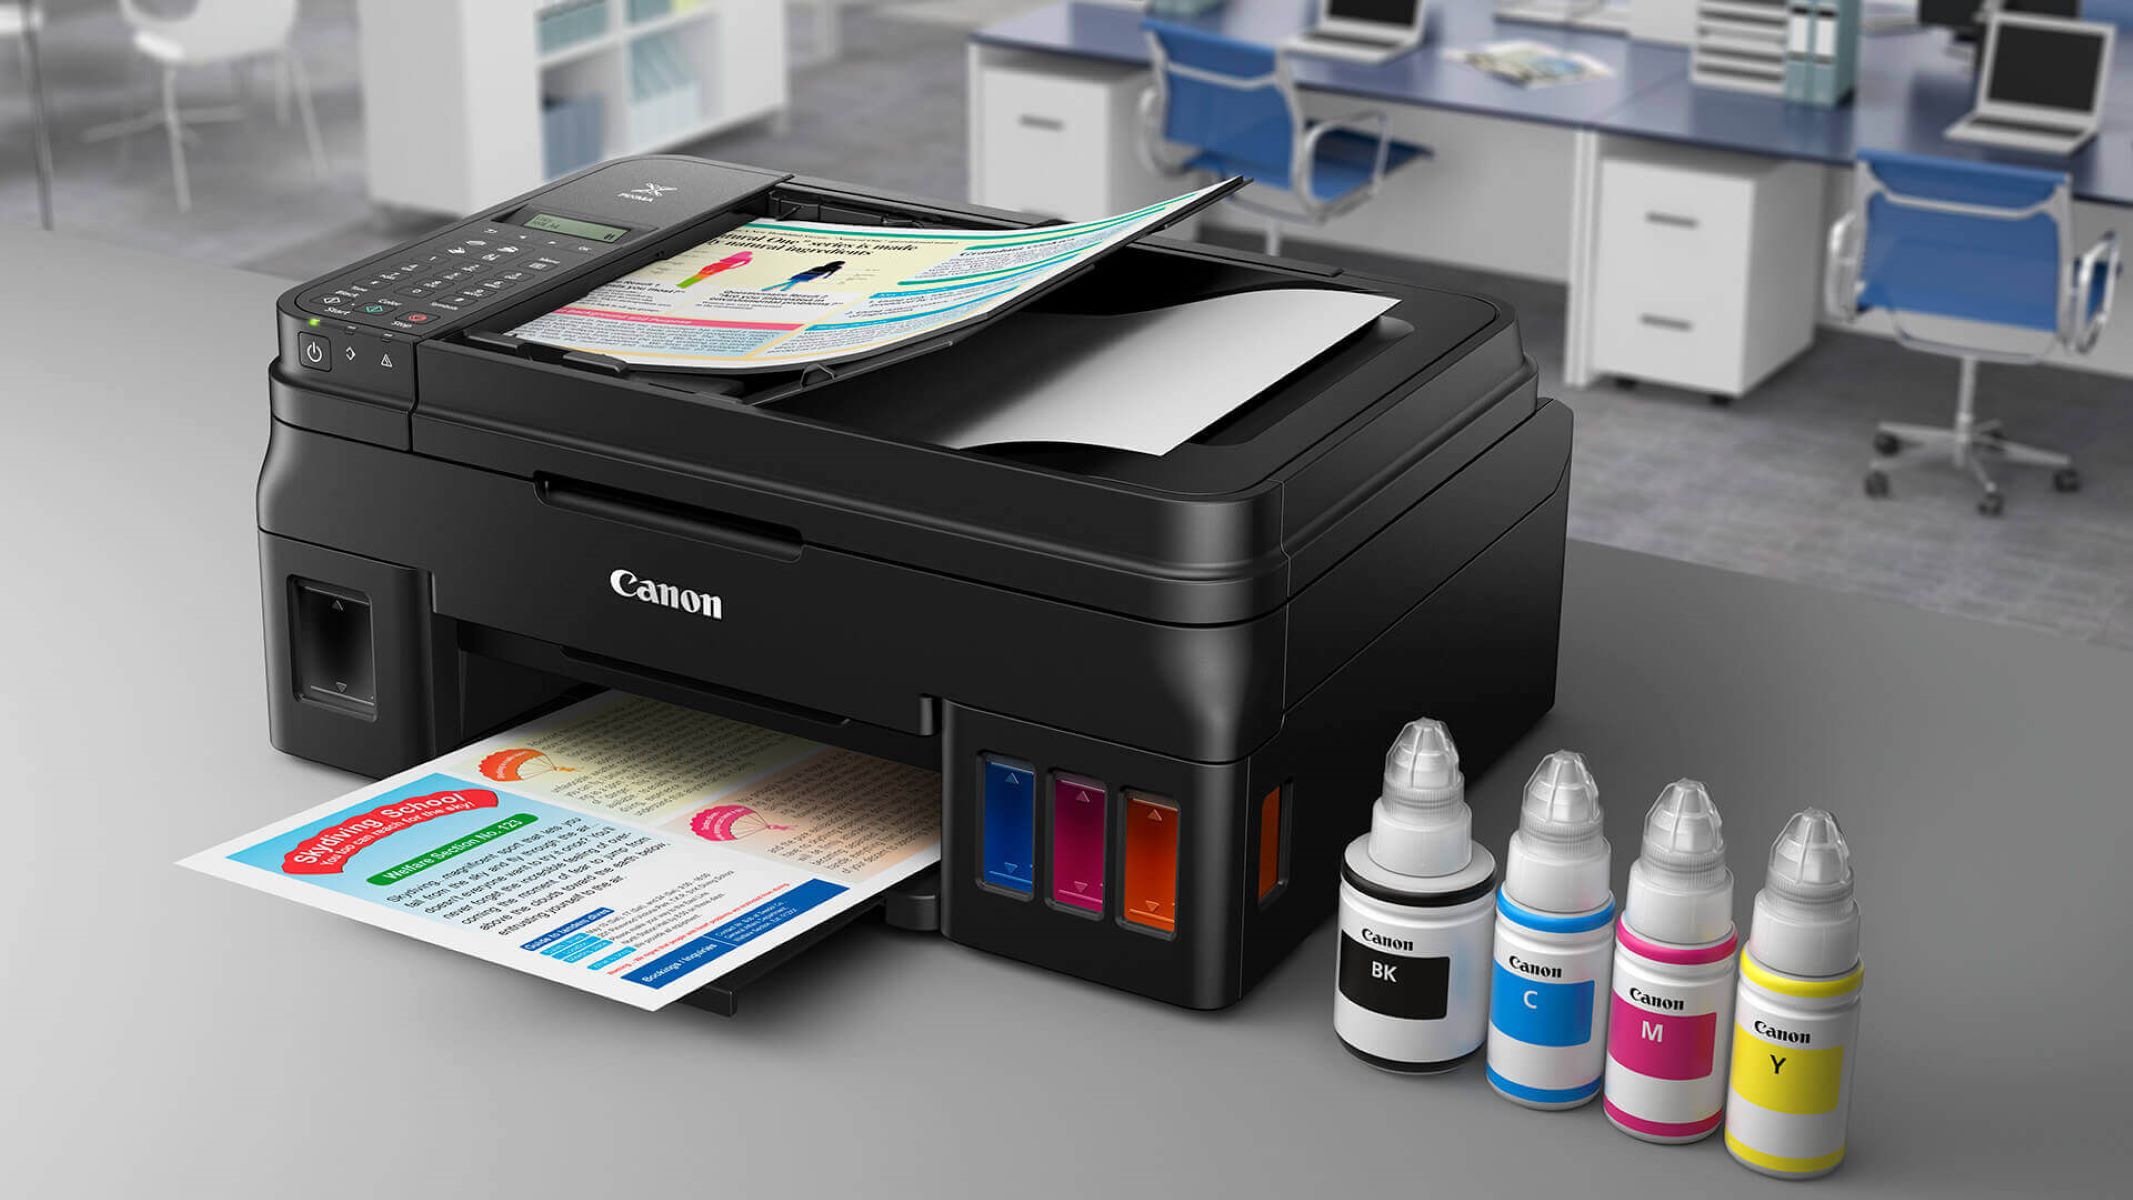 How To Connect Wi-Fi To Canon Printer